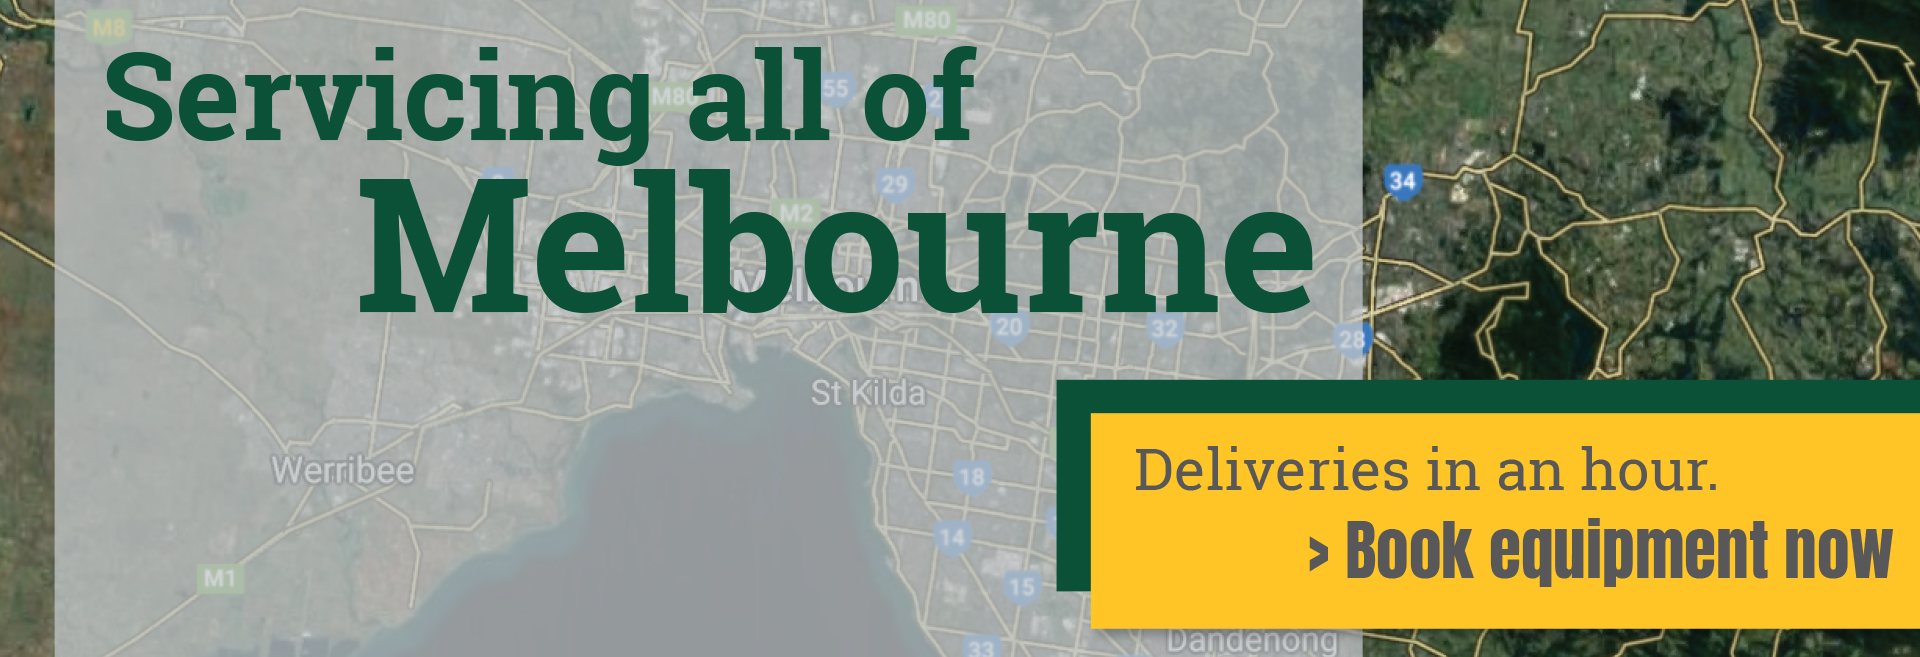 Servicing all of Melbourne